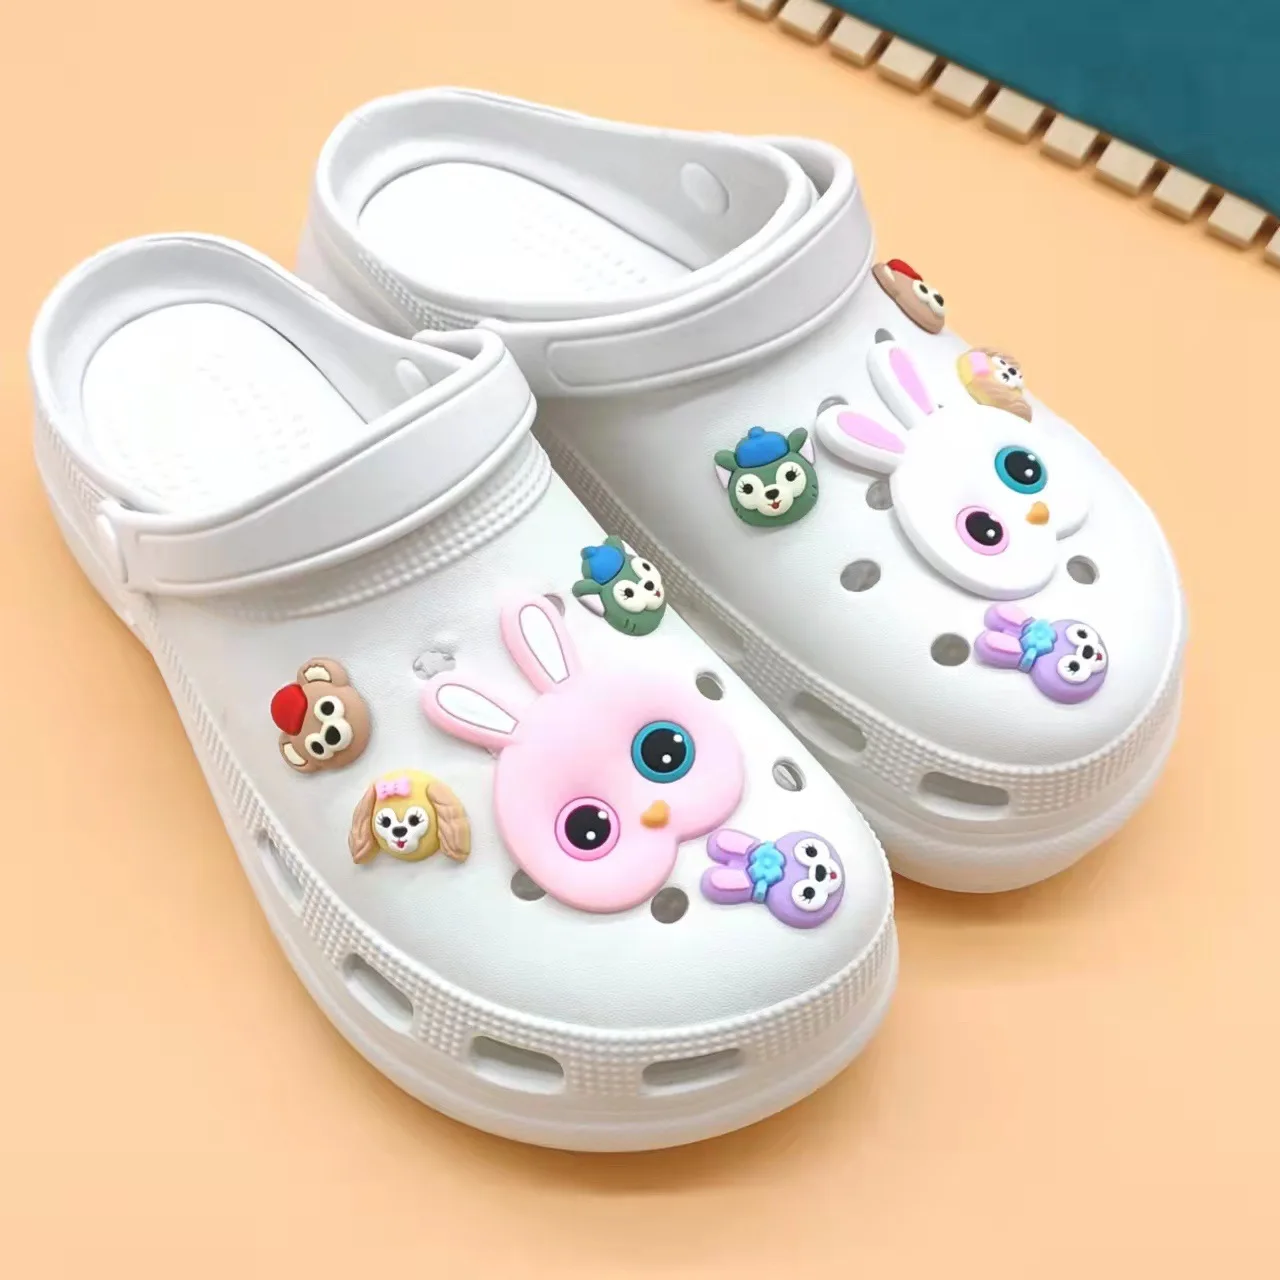 Trend Croc Shoes Jewelry Cartoon Fashion Comfortable Rabbit Ear Shoes Flower Girl Holiday Gift Croc Charms Designer